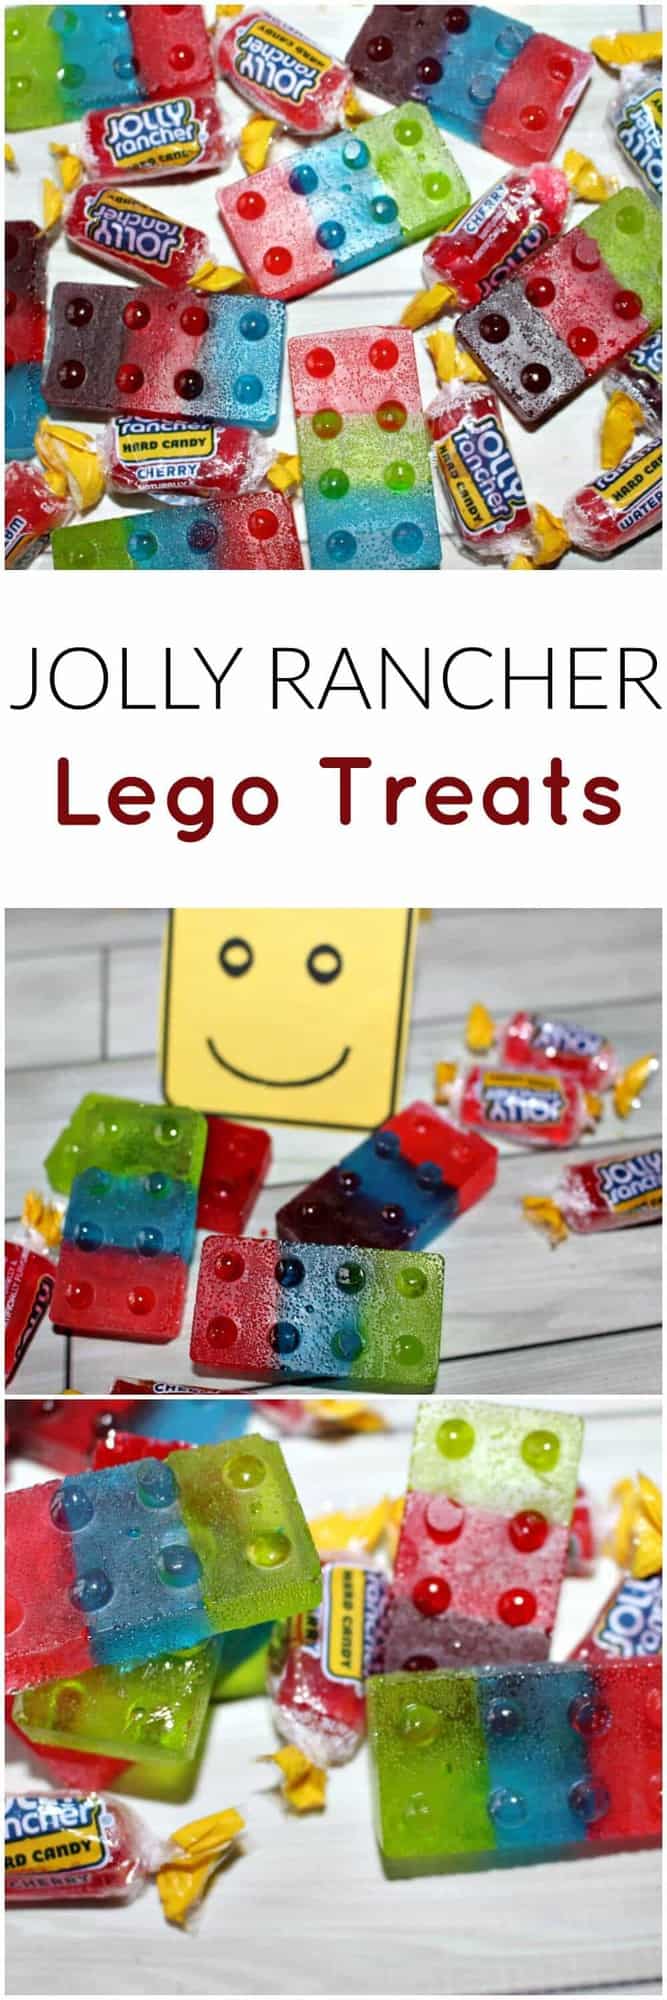 Jolly Rancher Lego Treats - perfect for Valentine's Day or a Lego Themed Party